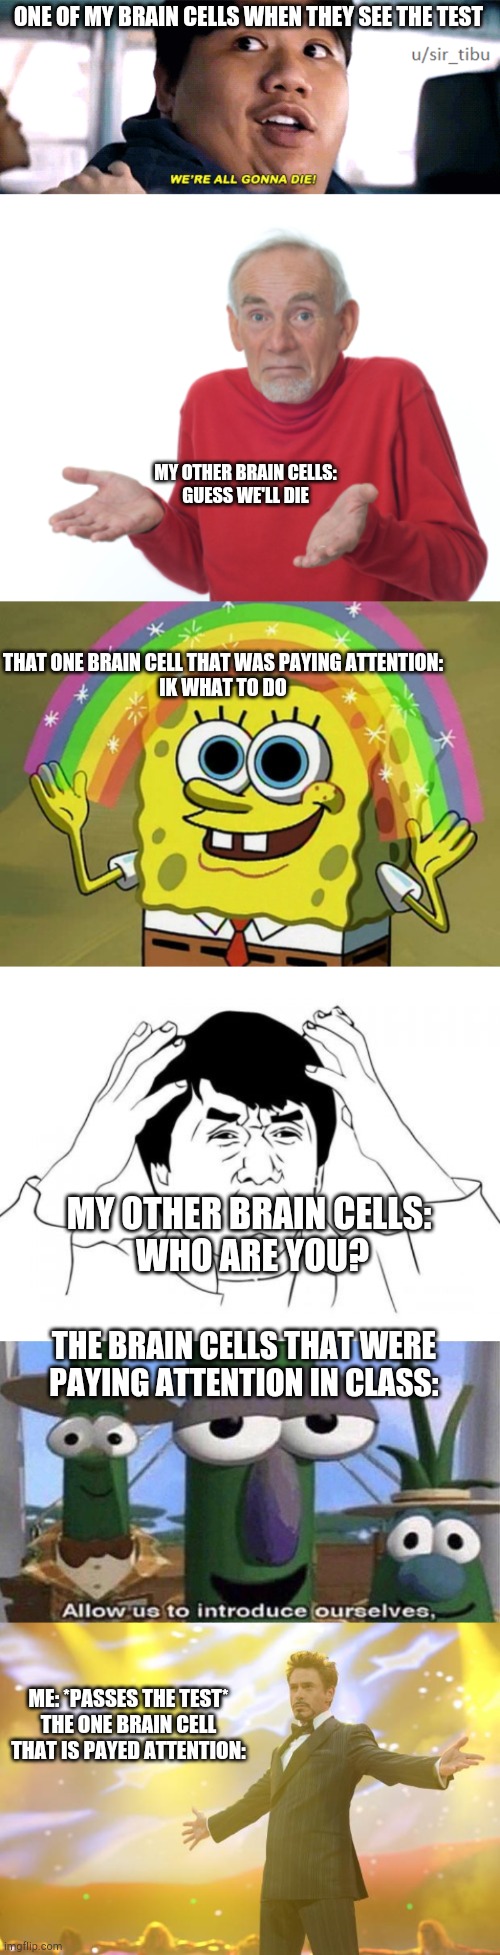 ONE OF MY BRAIN CELLS WHEN THEY SEE THE TEST; MY OTHER BRAIN CELLS:
GUESS WE'LL DIE; THAT ONE BRAIN CELL THAT WAS PAYING ATTENTION:
IK WHAT TO DO; MY OTHER BRAIN CELLS: 
WHO ARE YOU? THE BRAIN CELLS THAT WERE PAYING ATTENTION IN CLASS:; ME: *PASSES THE TEST*
THE ONE BRAIN CELL THAT IS PAYED ATTENTION: | image tagged in were all going to die,guess i'll die,memes,imagination spongebob,jackie chan wtf,veggietales 'allow us to introduce ourselfs' | made w/ Imgflip meme maker